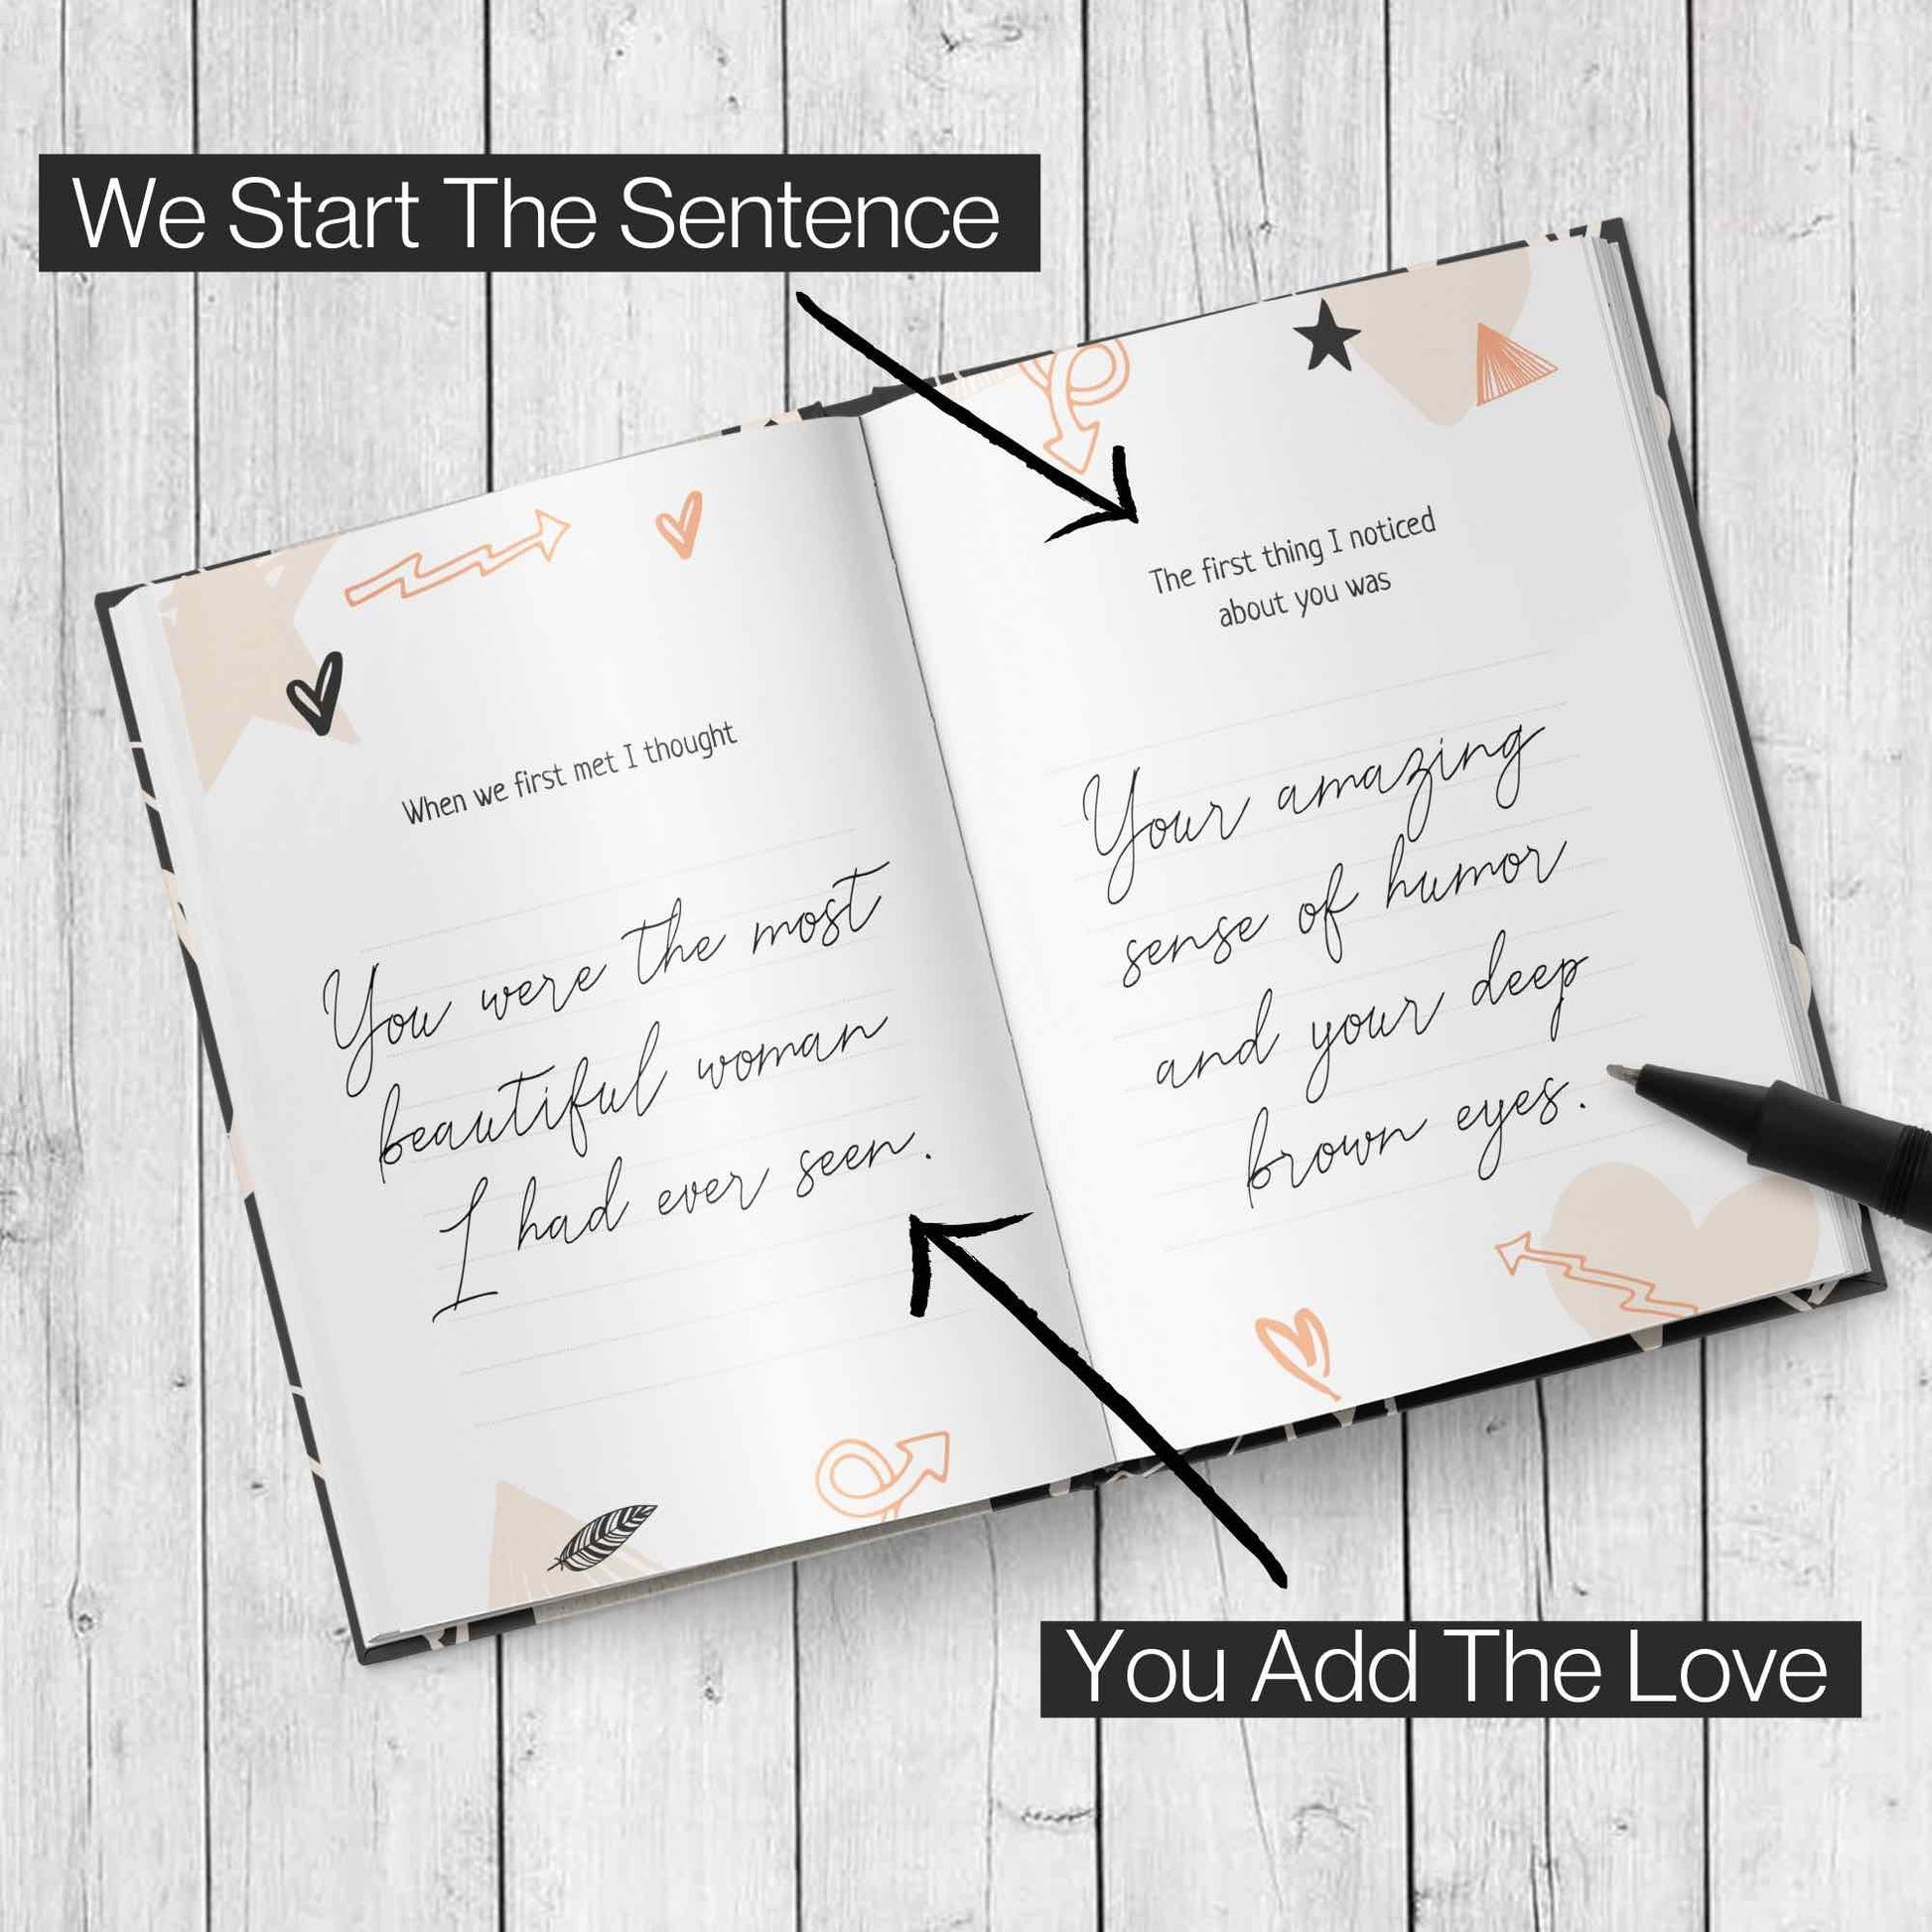 Personalized Why I Love You Book. Fill In the blank book example with prompts and responses.